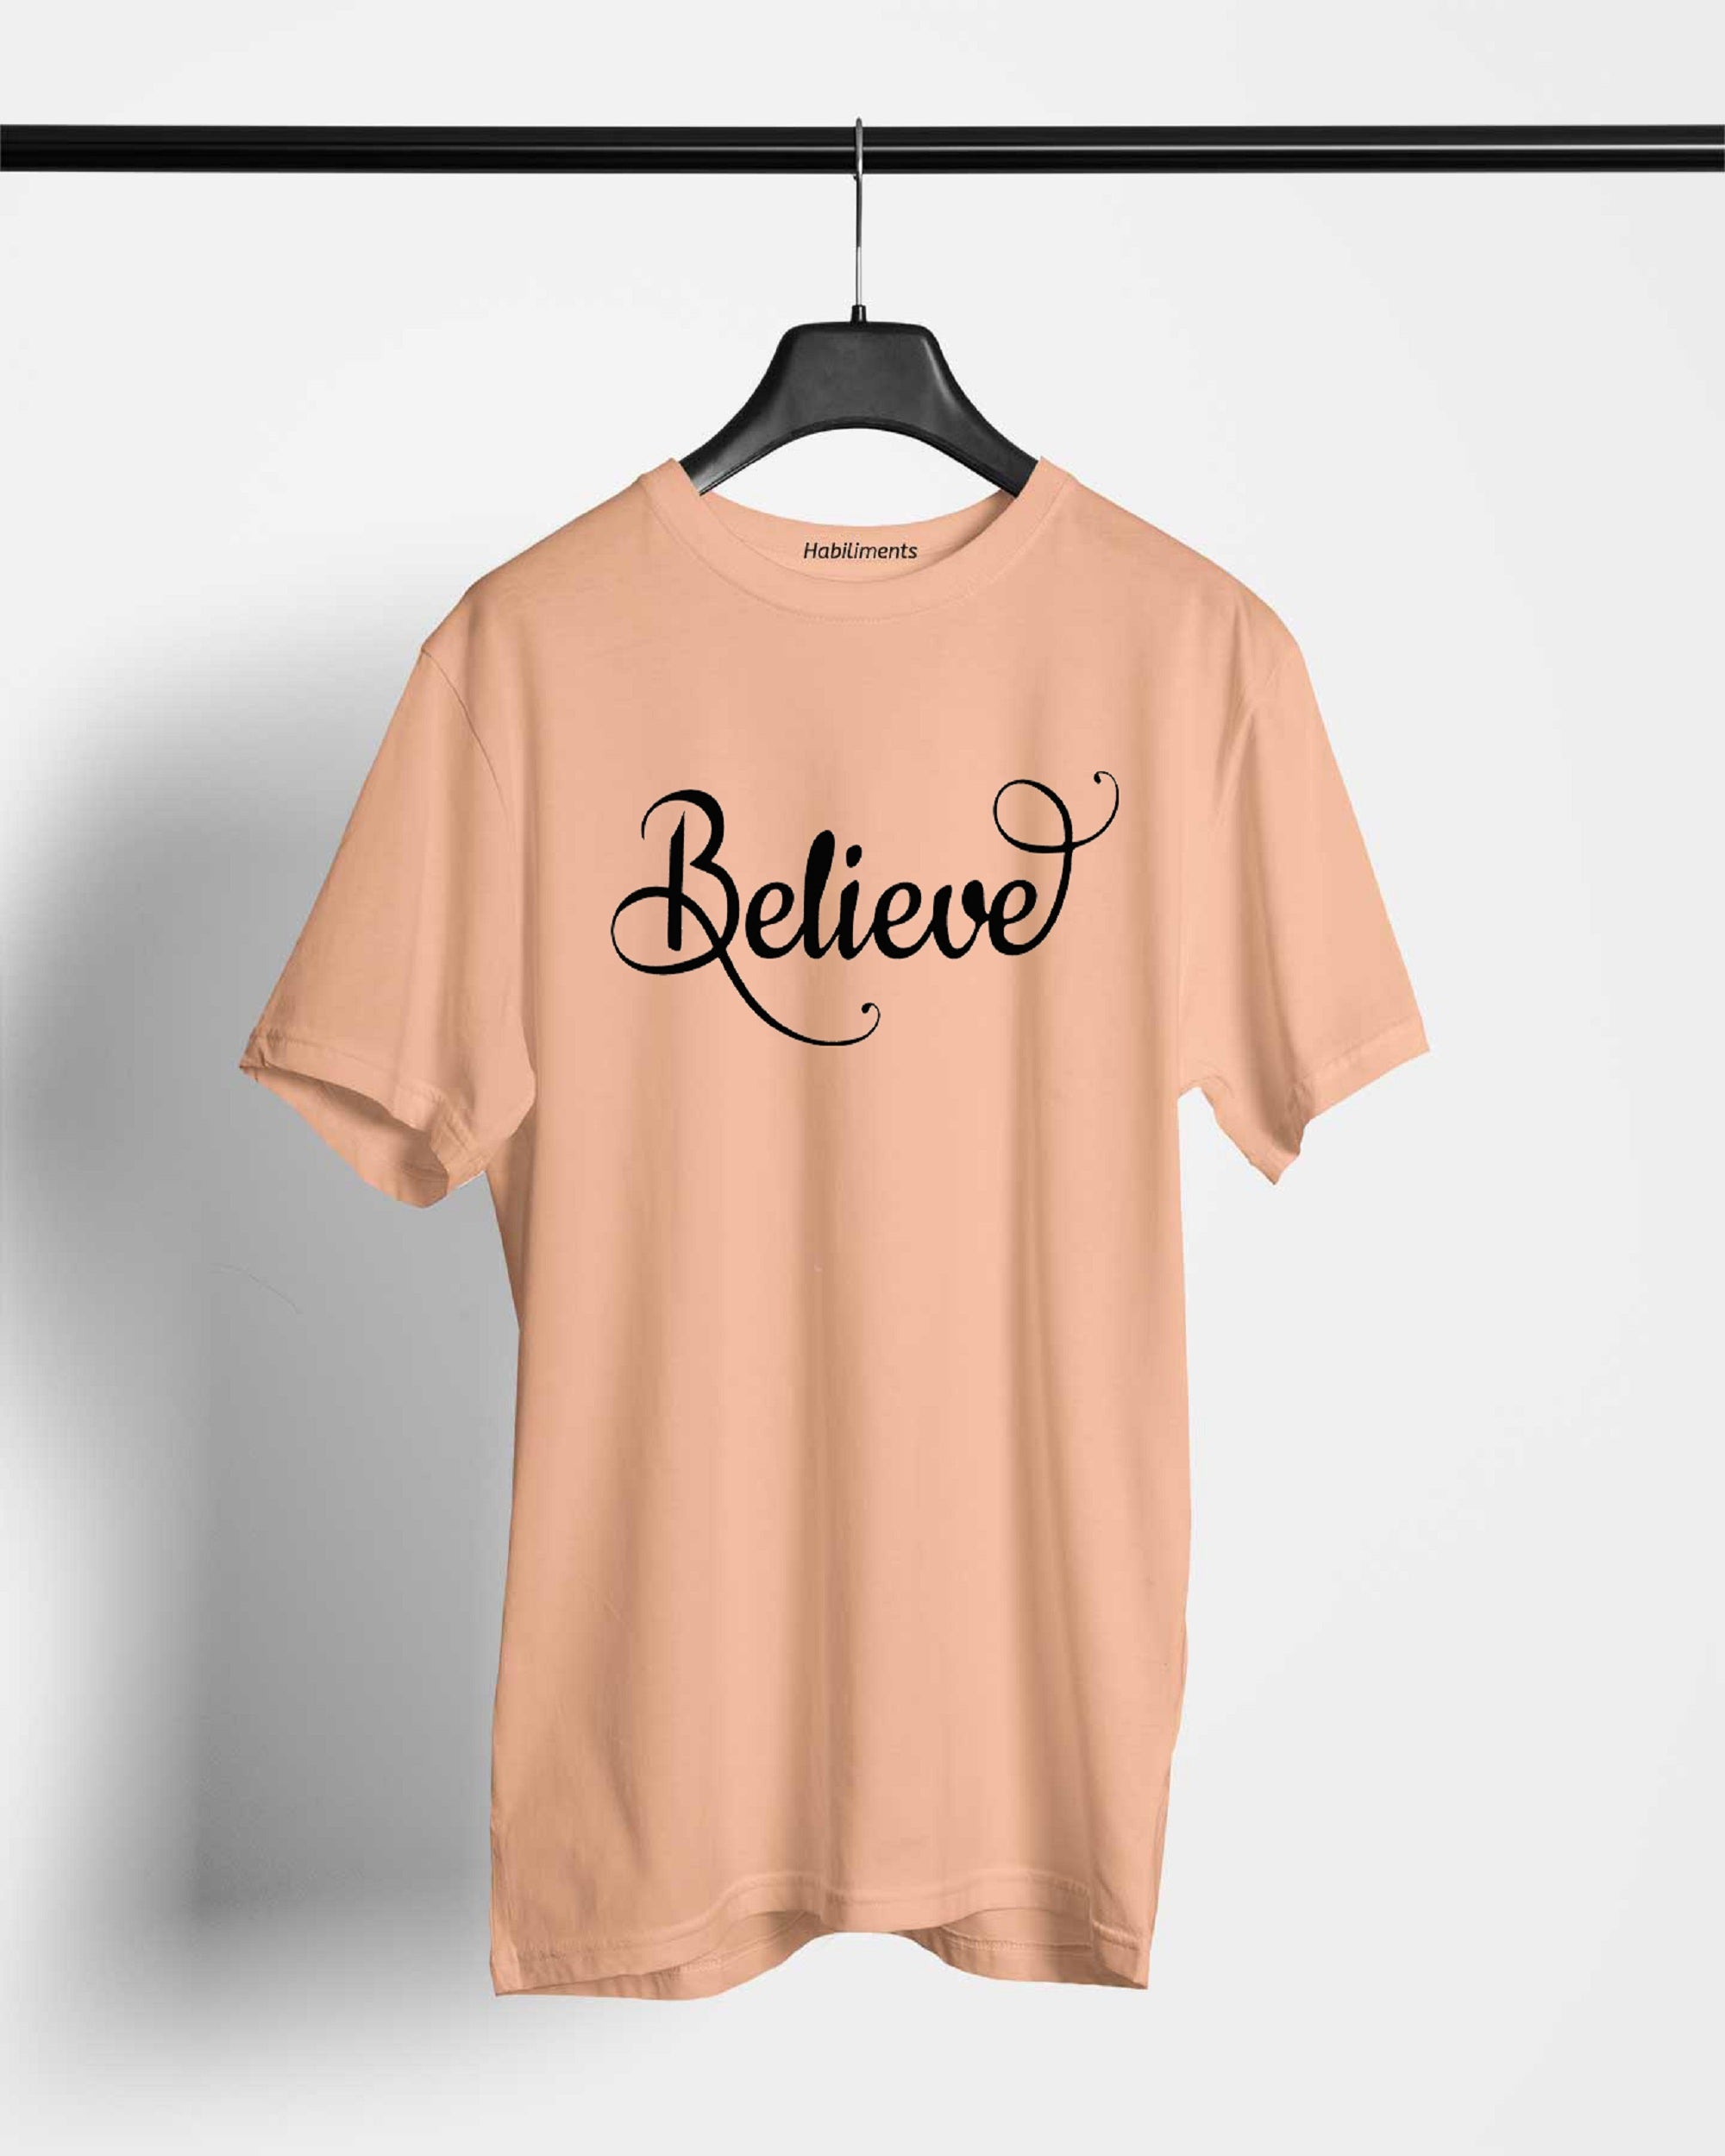 Believe New T-Shirts For Men || Peach || Stylish Tshirts || 100% Cotton || Best T-Shirt For Men's